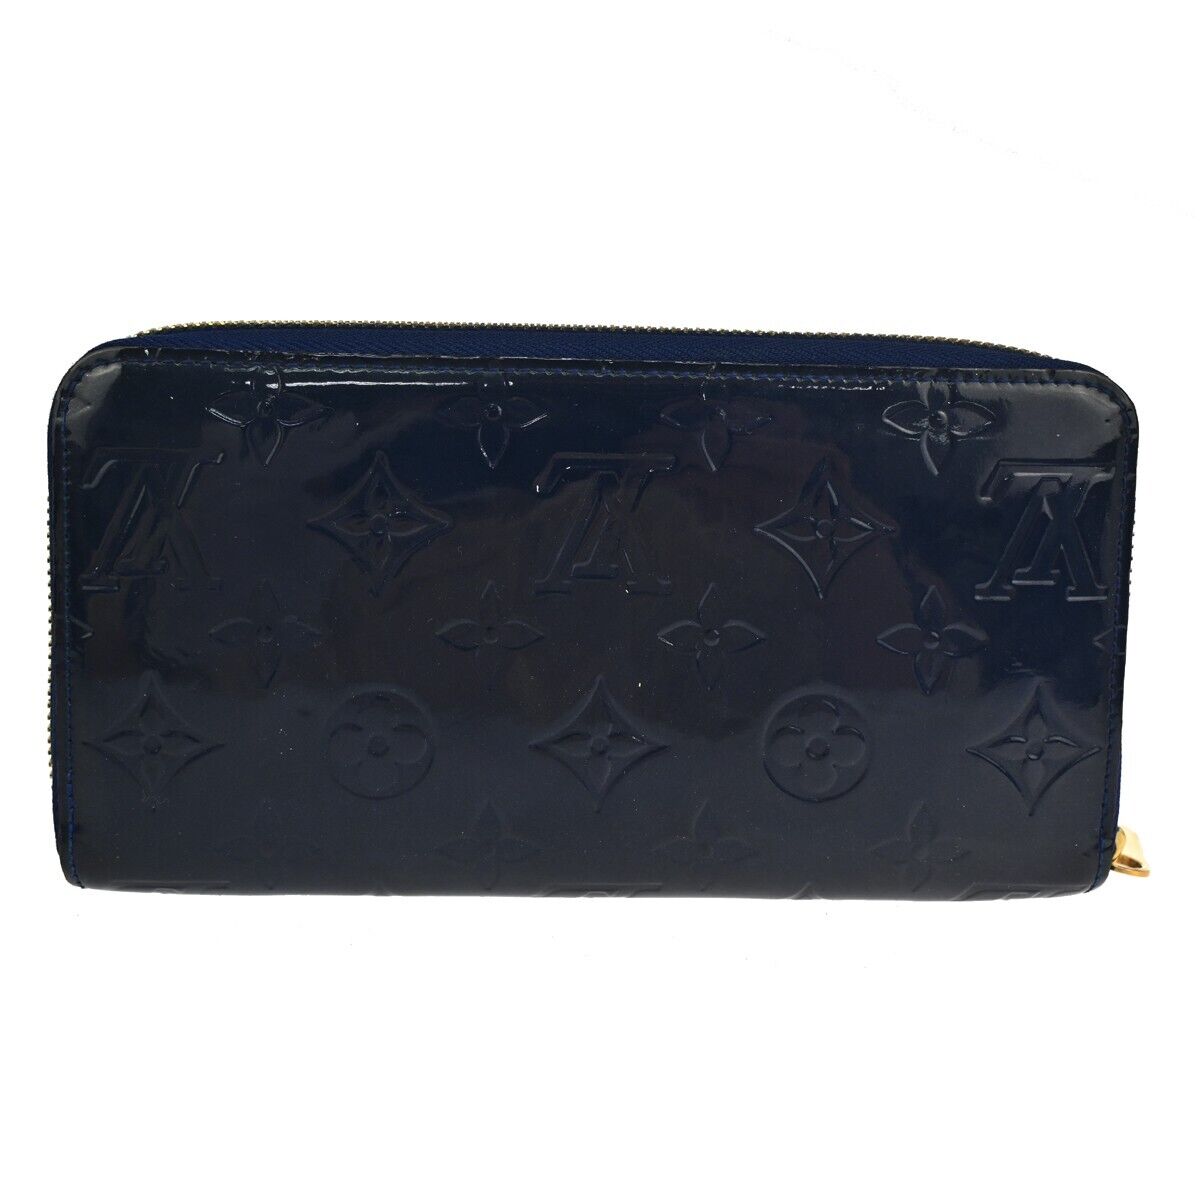 Pre-owned Louis Vuitton Portefeuille Zippy Navy Patent Leather Wallet  ()